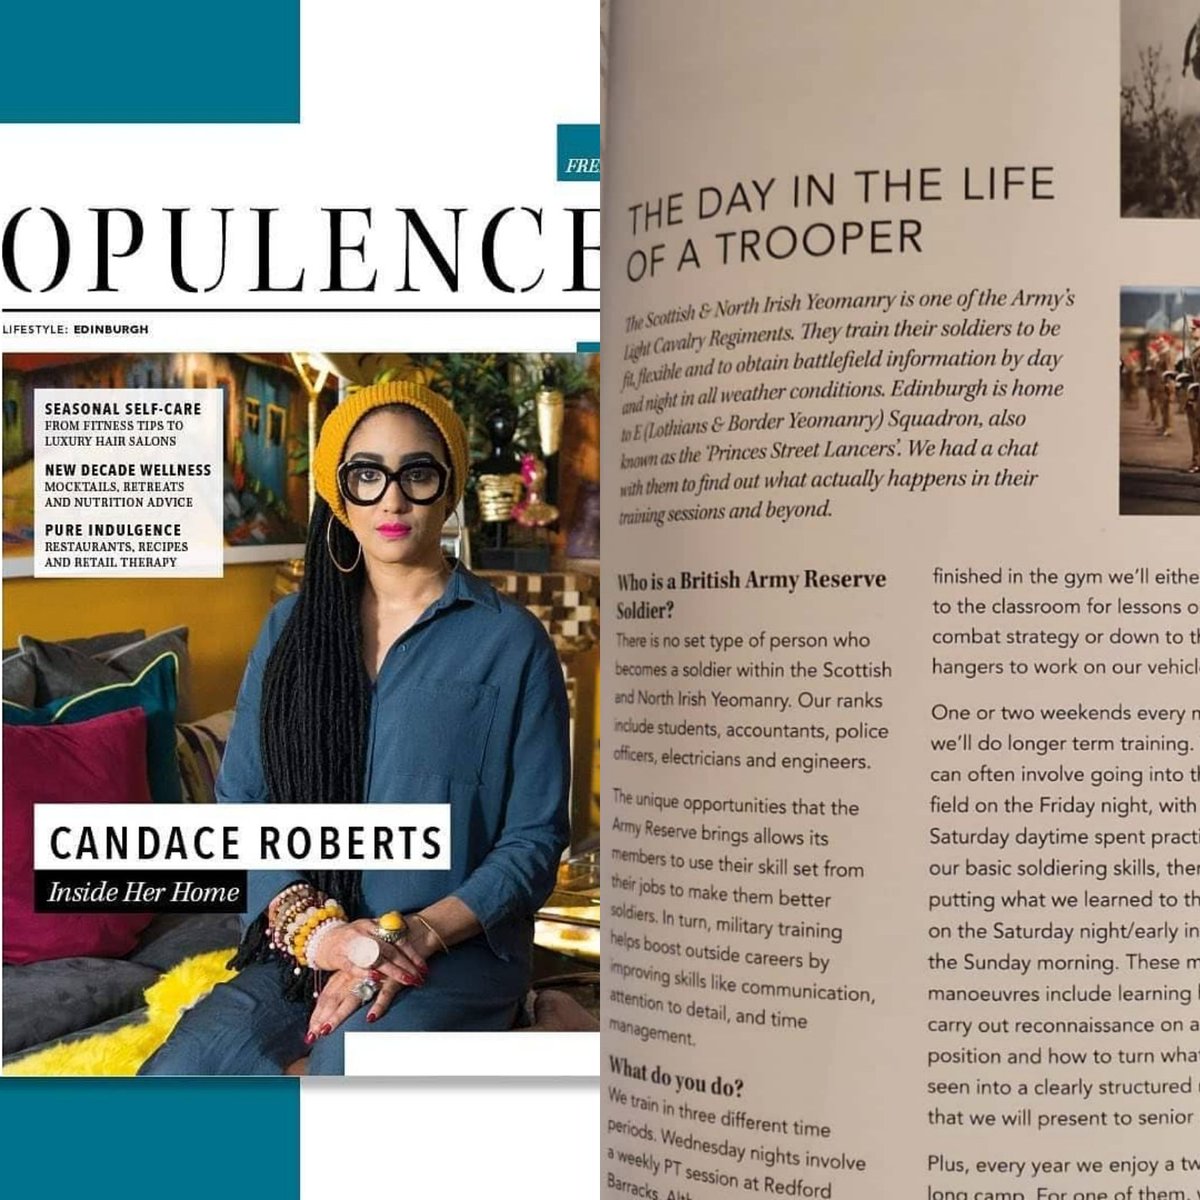 Check out the latest @Opulence_mag for an article on The Day In The Life Of A Trooper @ArmyComd51X @AlastairBruce_ @ColonelYeomanry @Lowland_RFCA